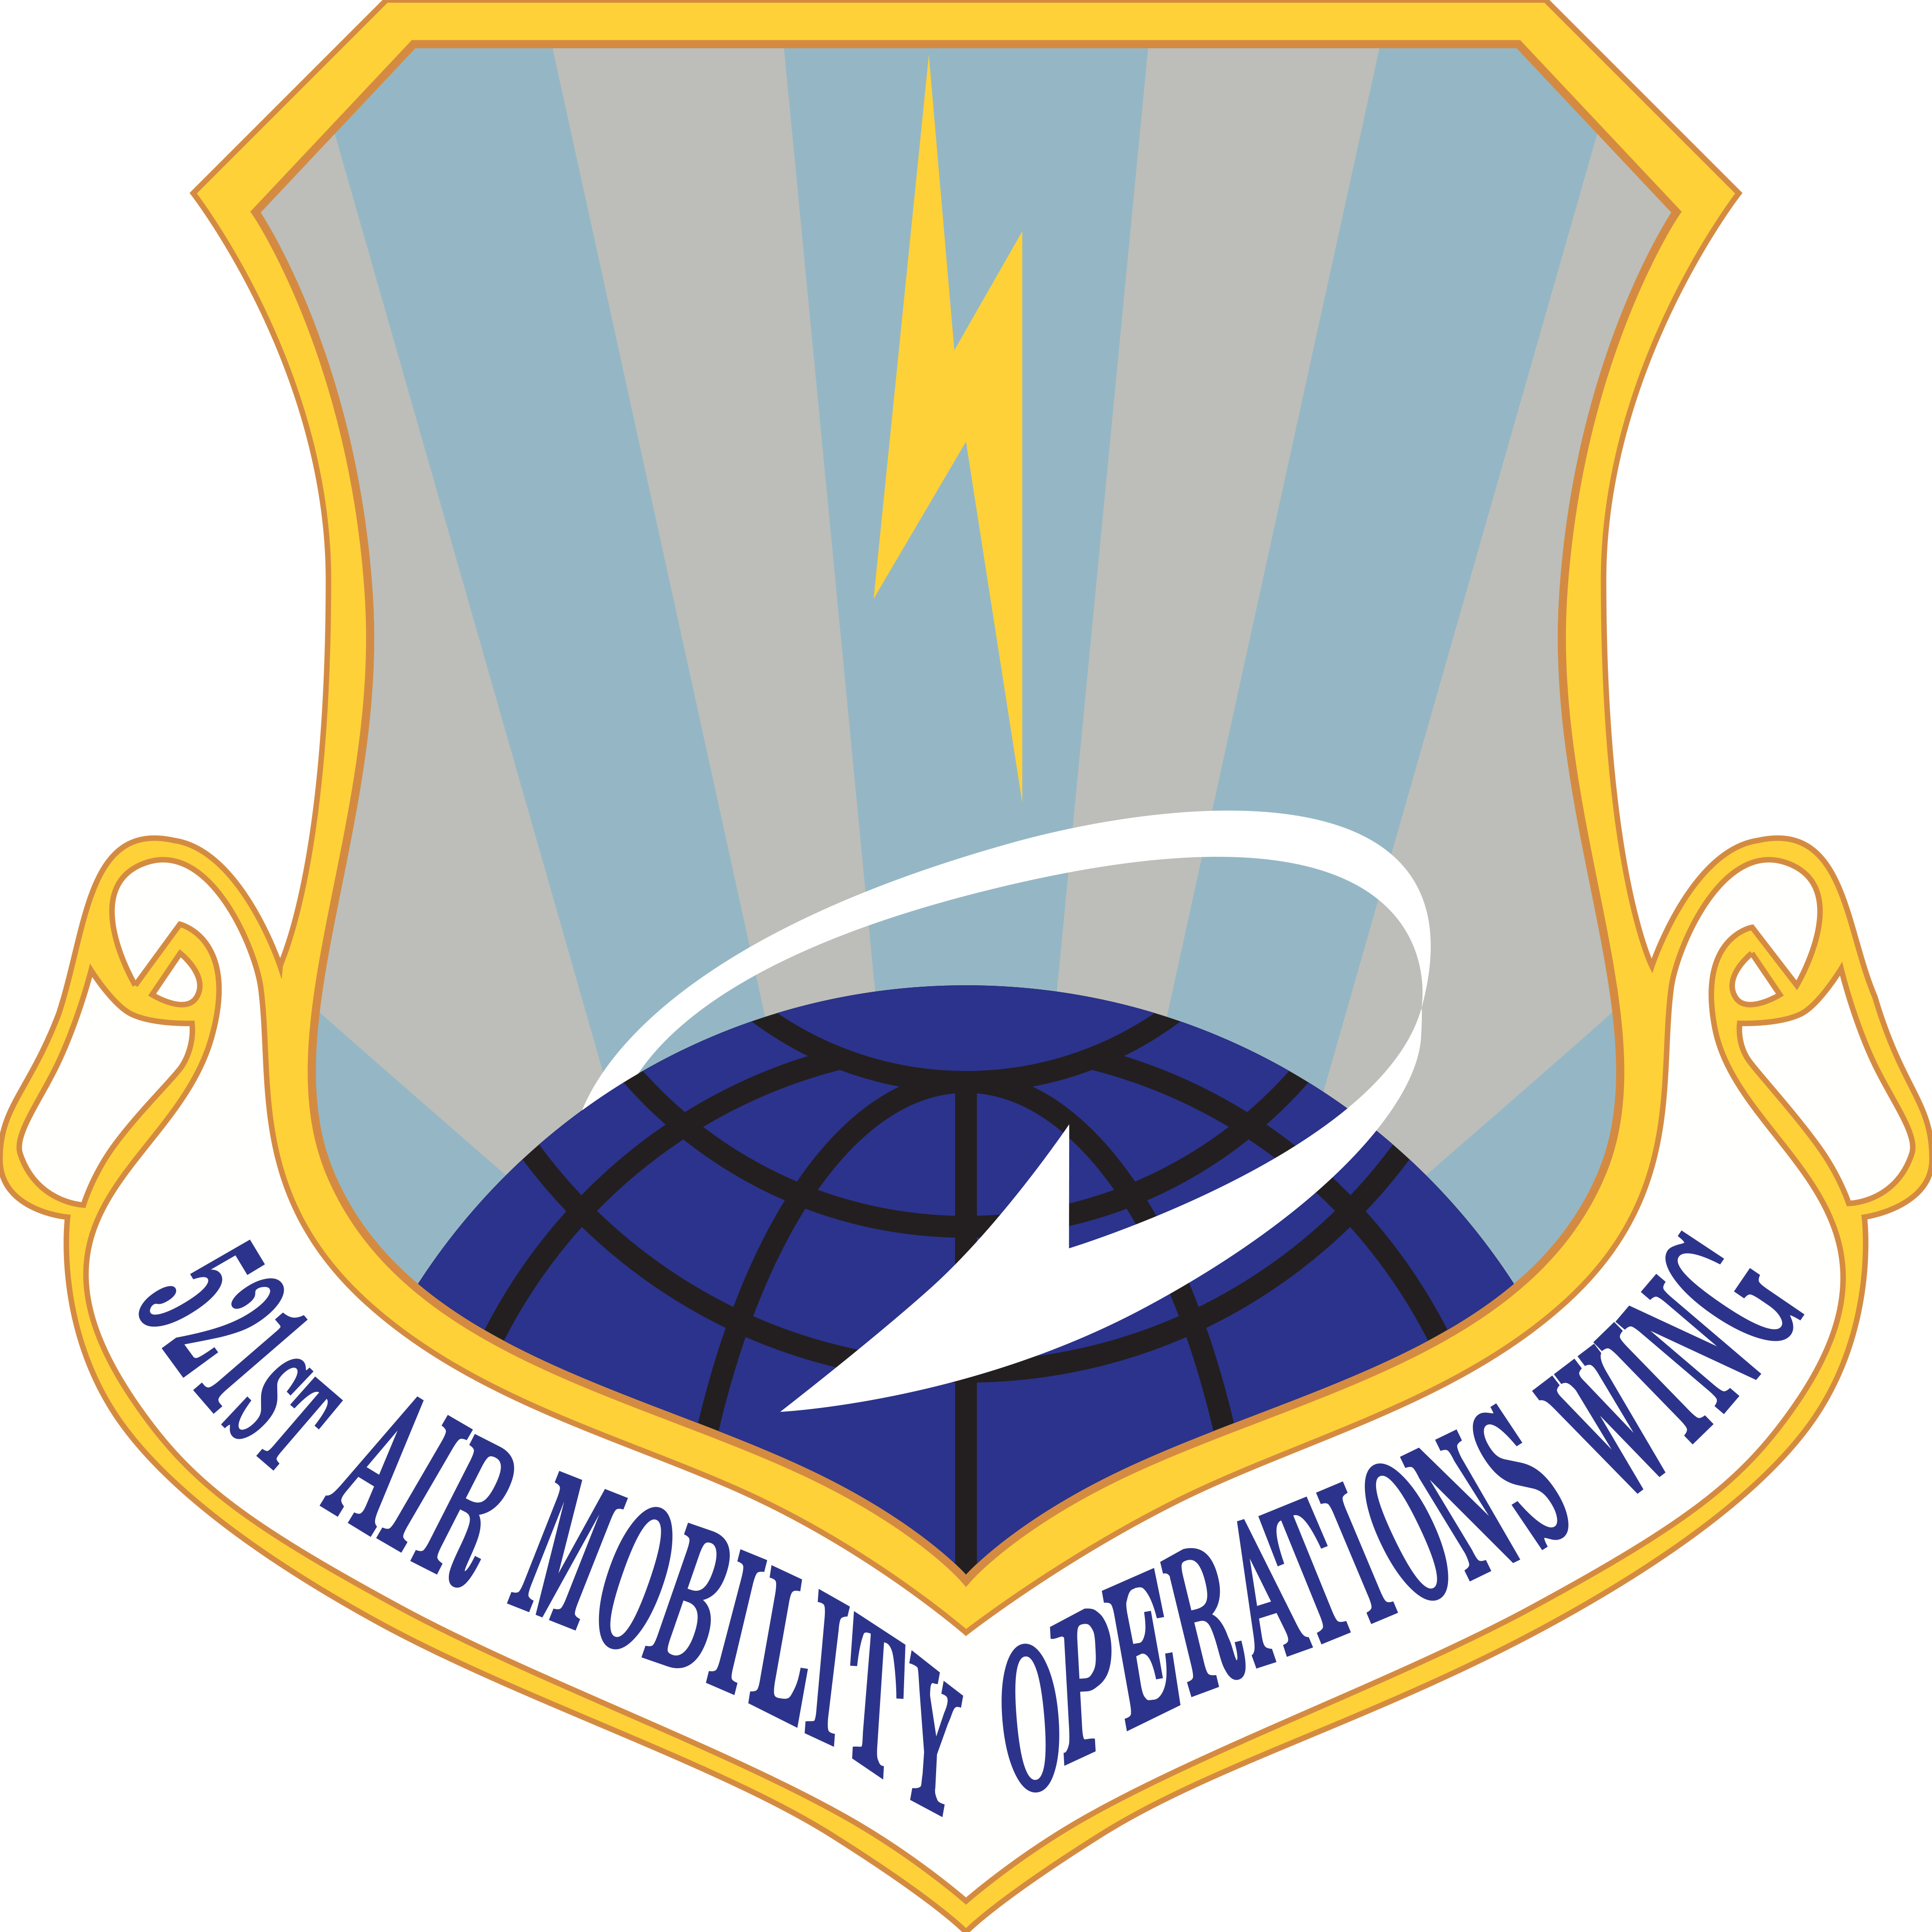 521st Air Mobility Operations Wing